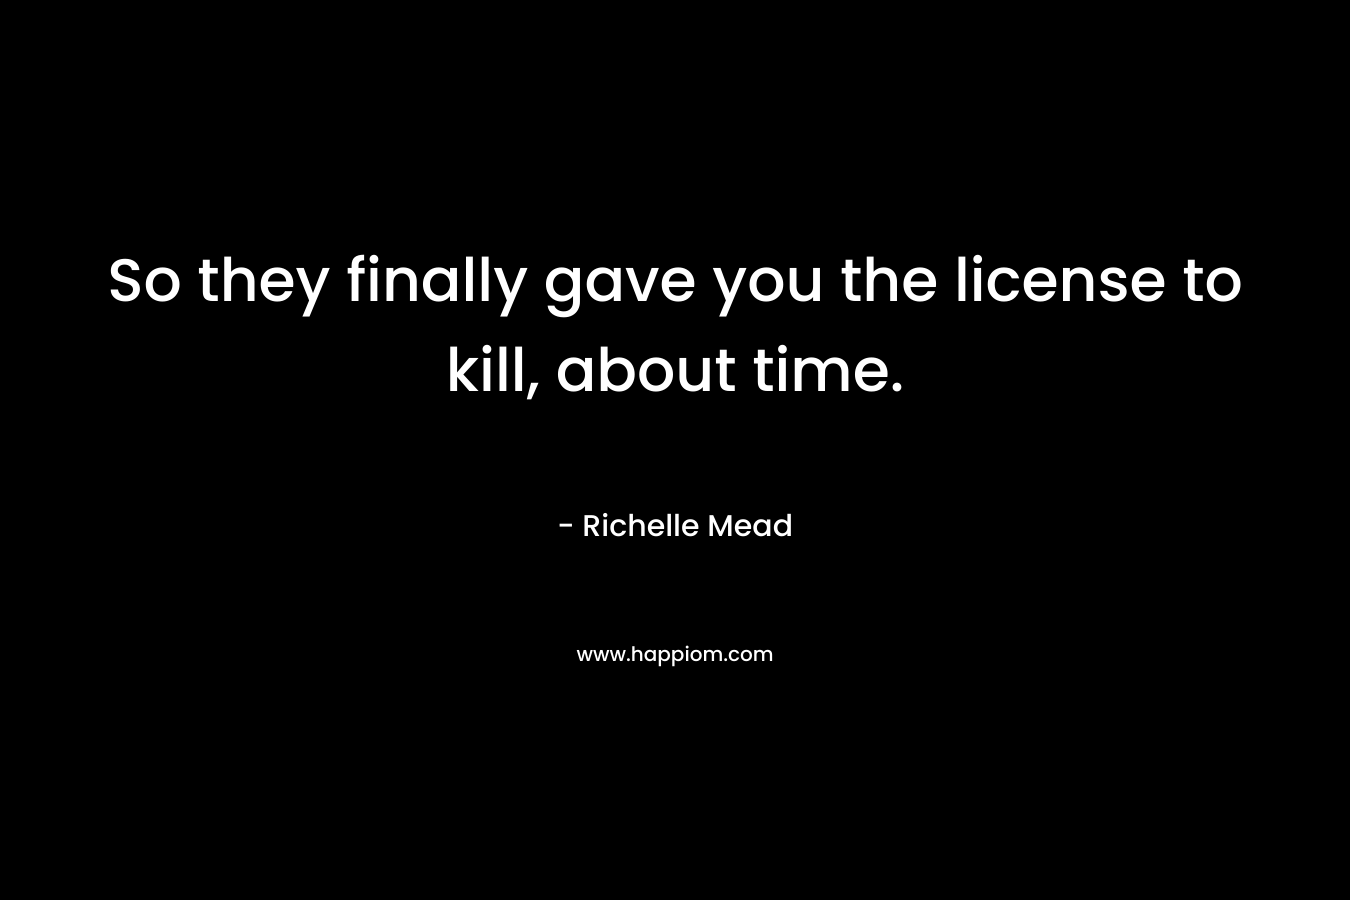 So they finally gave you the license to kill, about time.